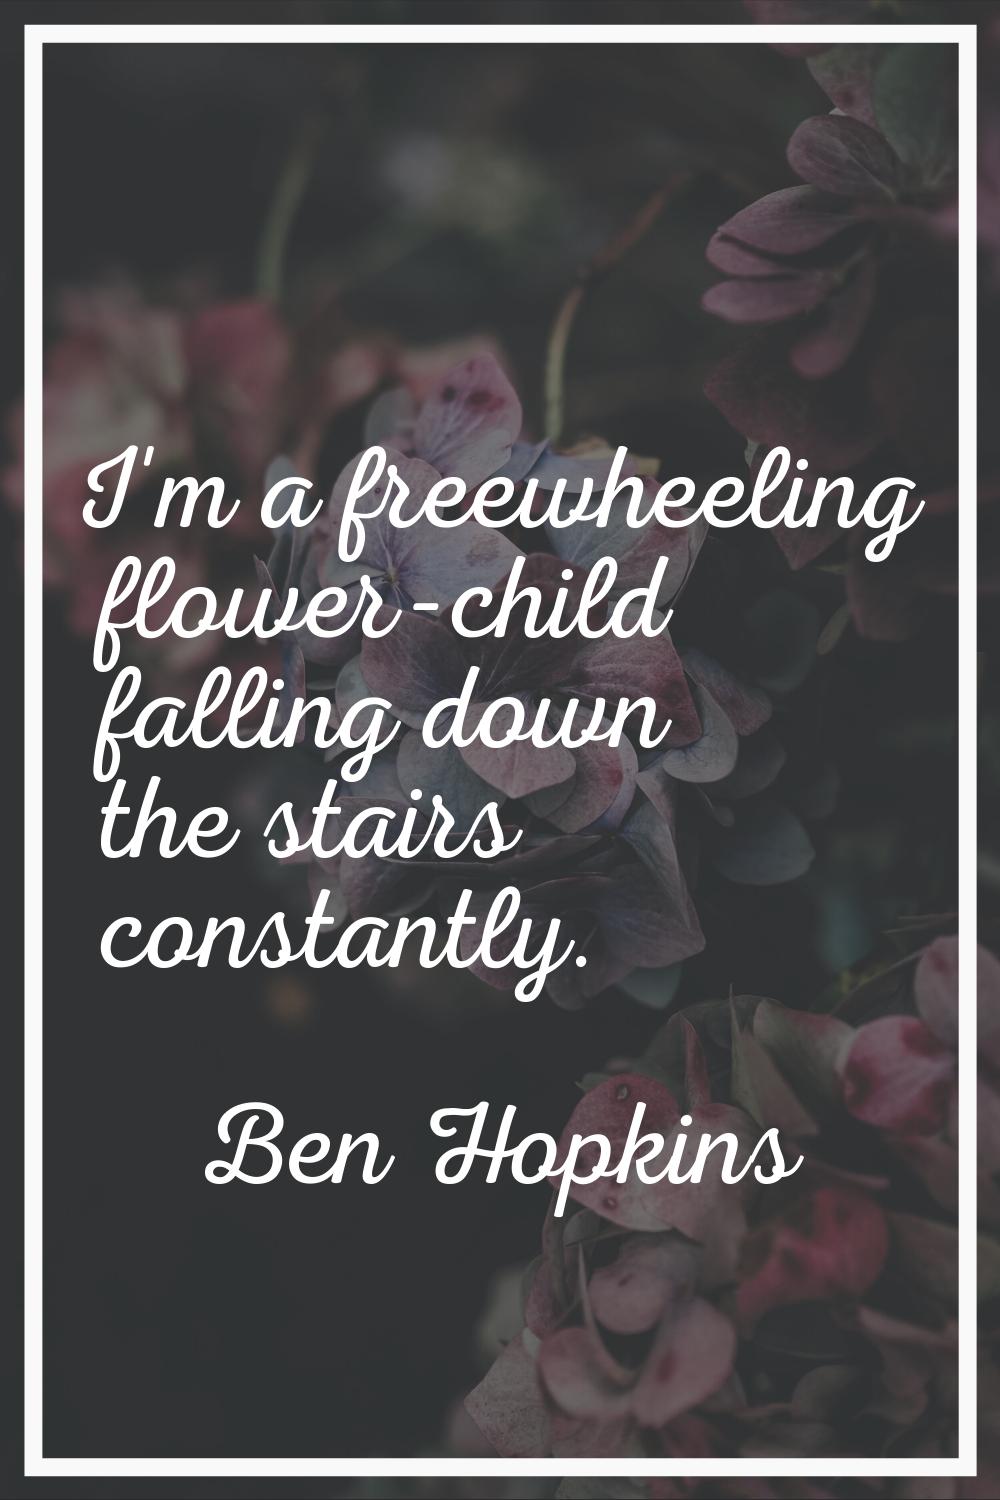 I'm a freewheeling flower-child falling down the stairs constantly.